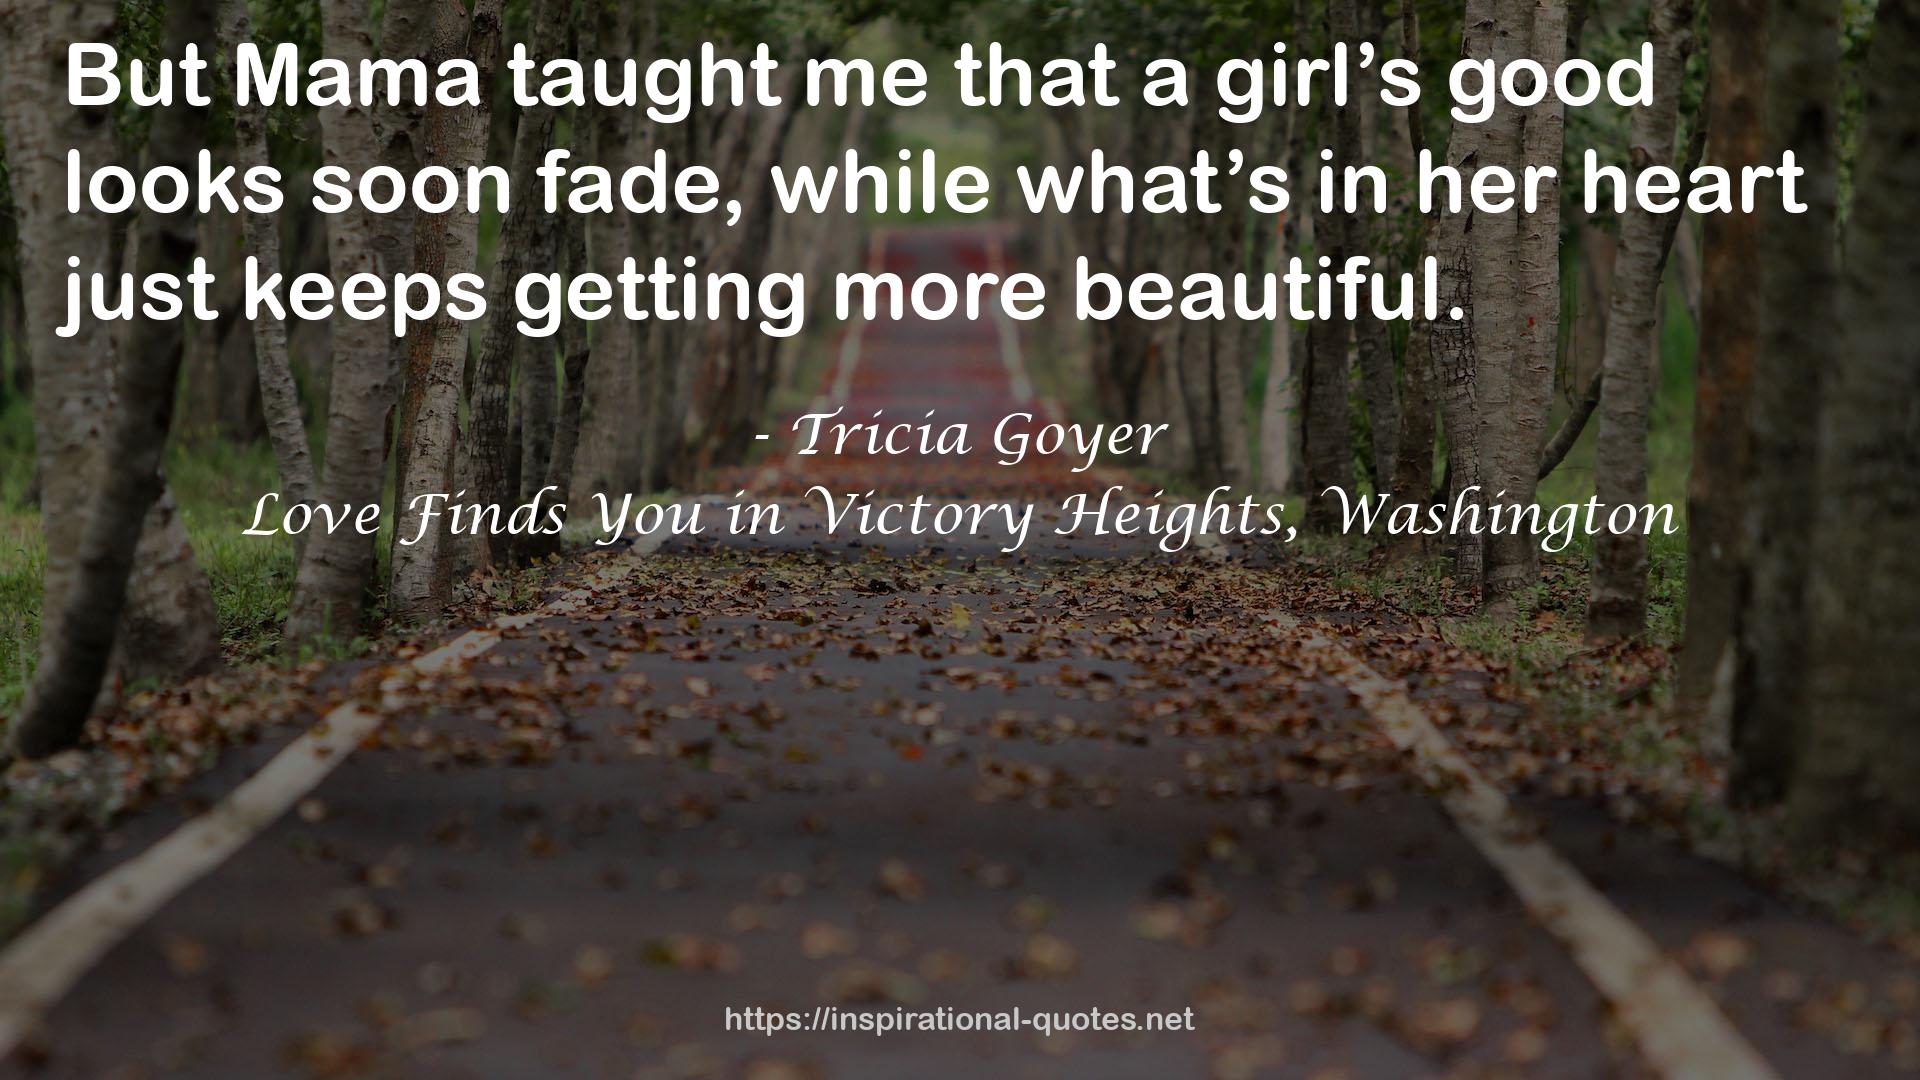 Love Finds You in Victory Heights, Washington QUOTES